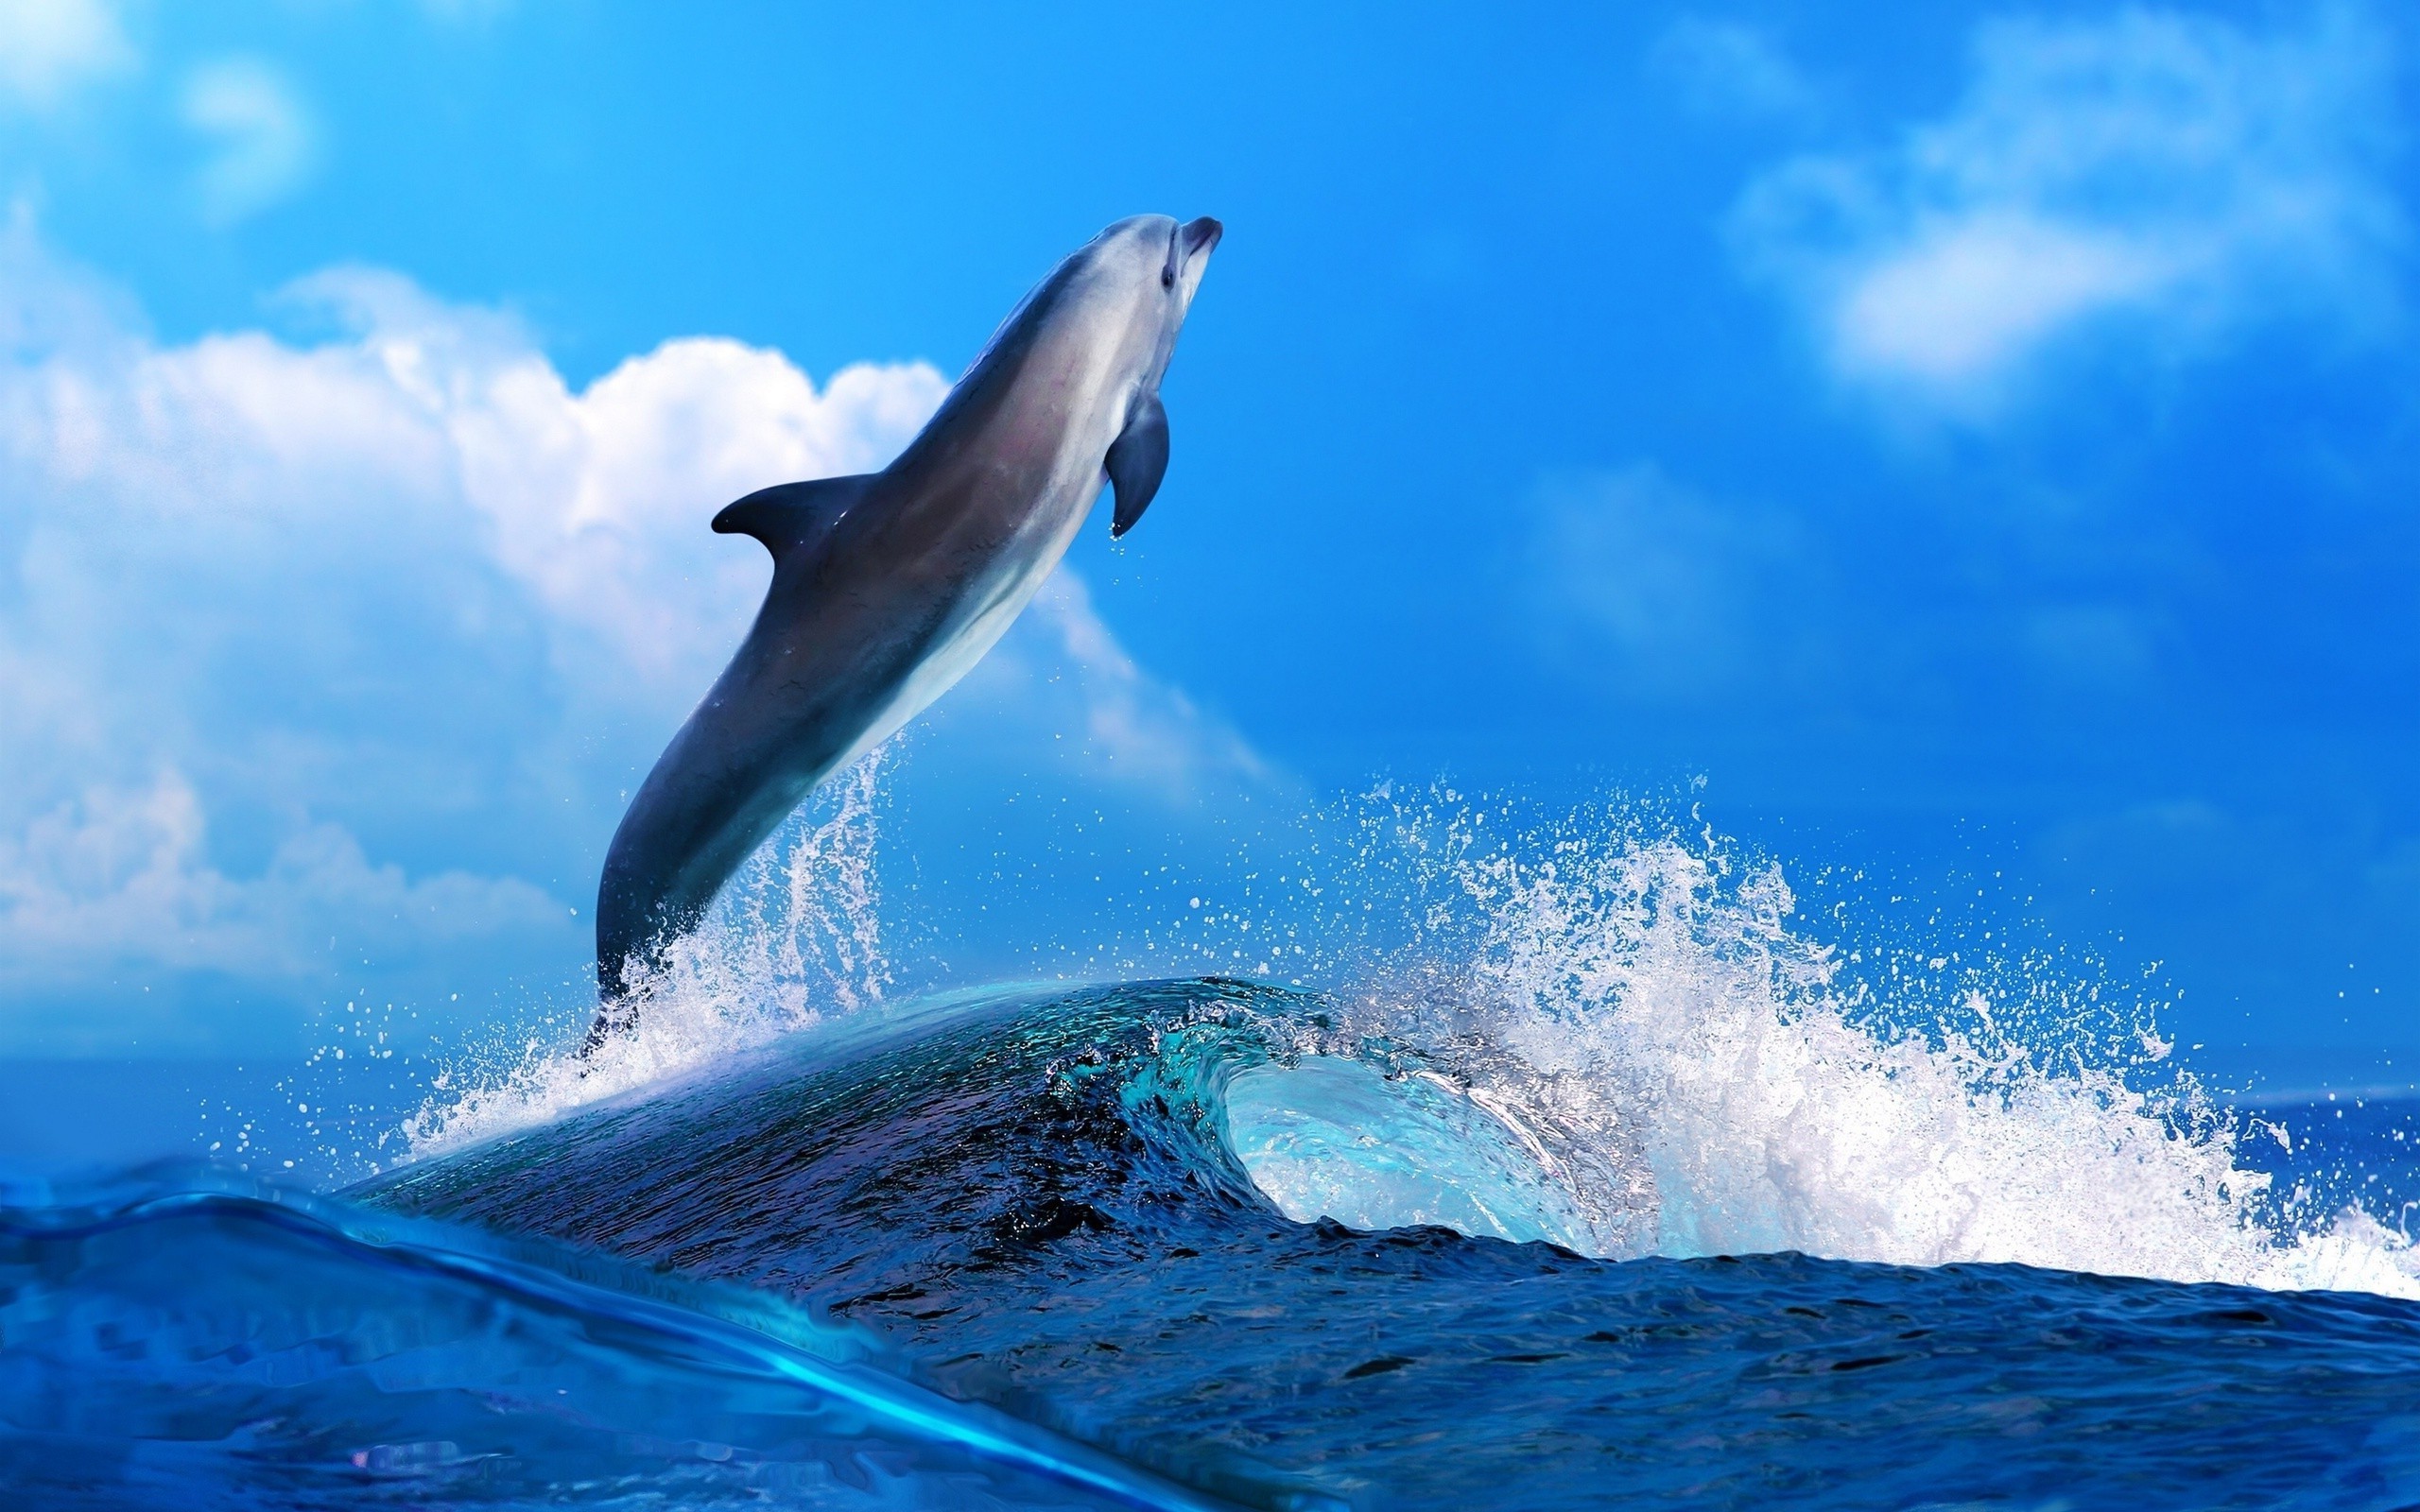 animals sea mammals nature sky clouds blue dolphin waves bottlenose dolphin Wallpaper